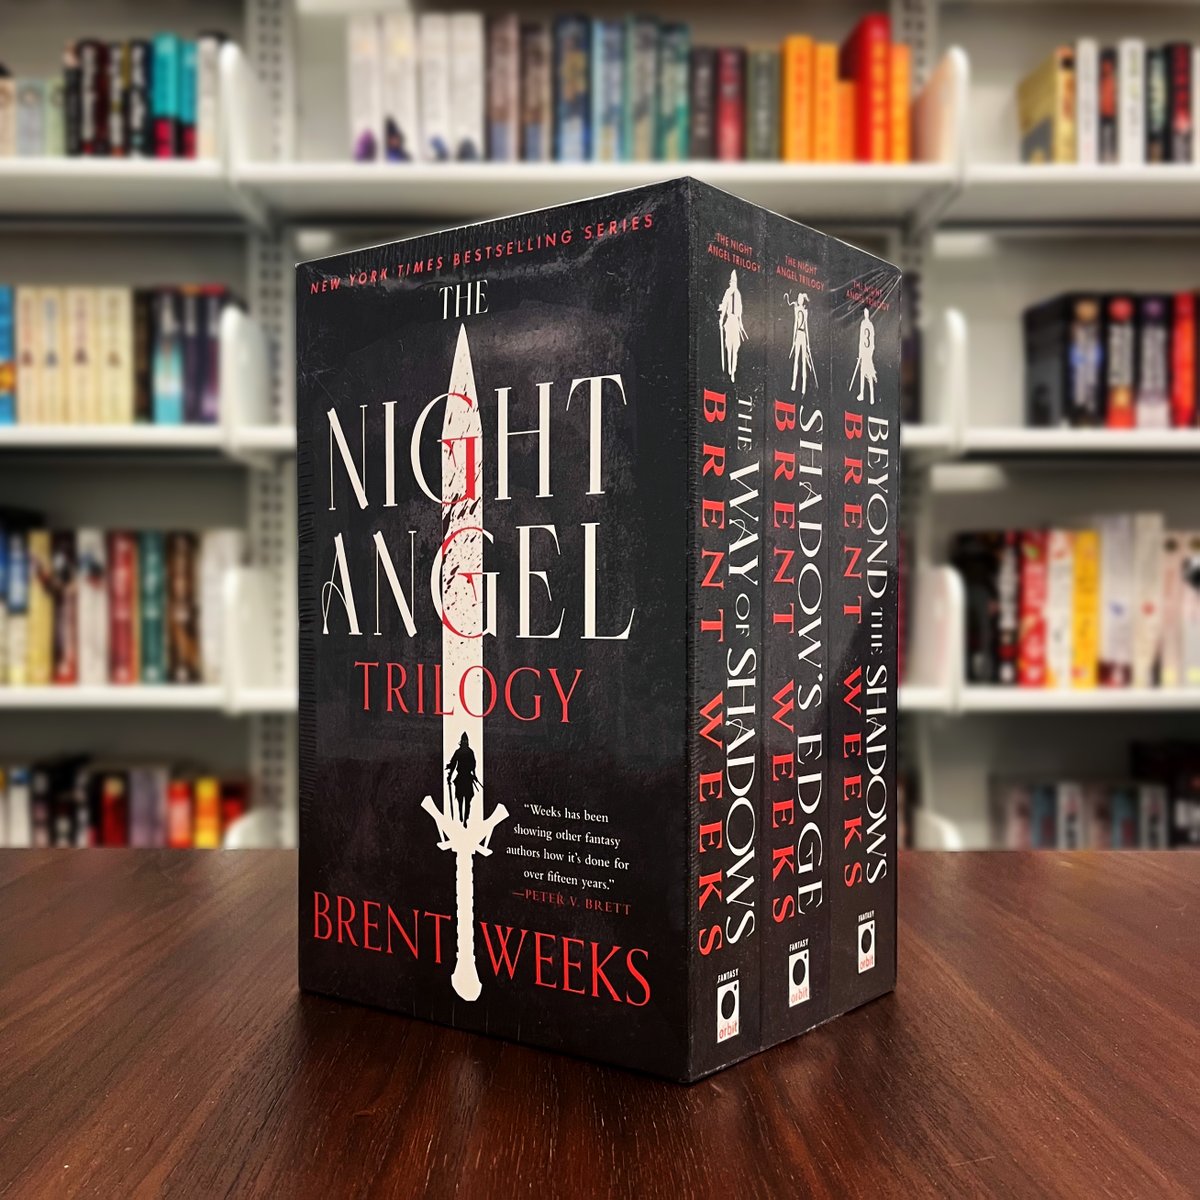 A modern classic of epic fantasy, the Night Angel Trilogy follows a young boy as he trains under the city’s most legendary and feared assassin. The Night Angel Trilogy by @BrentWeeks is available as a boxset this week! US: bit.ly/3RDs2CJ UK: bit.ly/3t69fq8